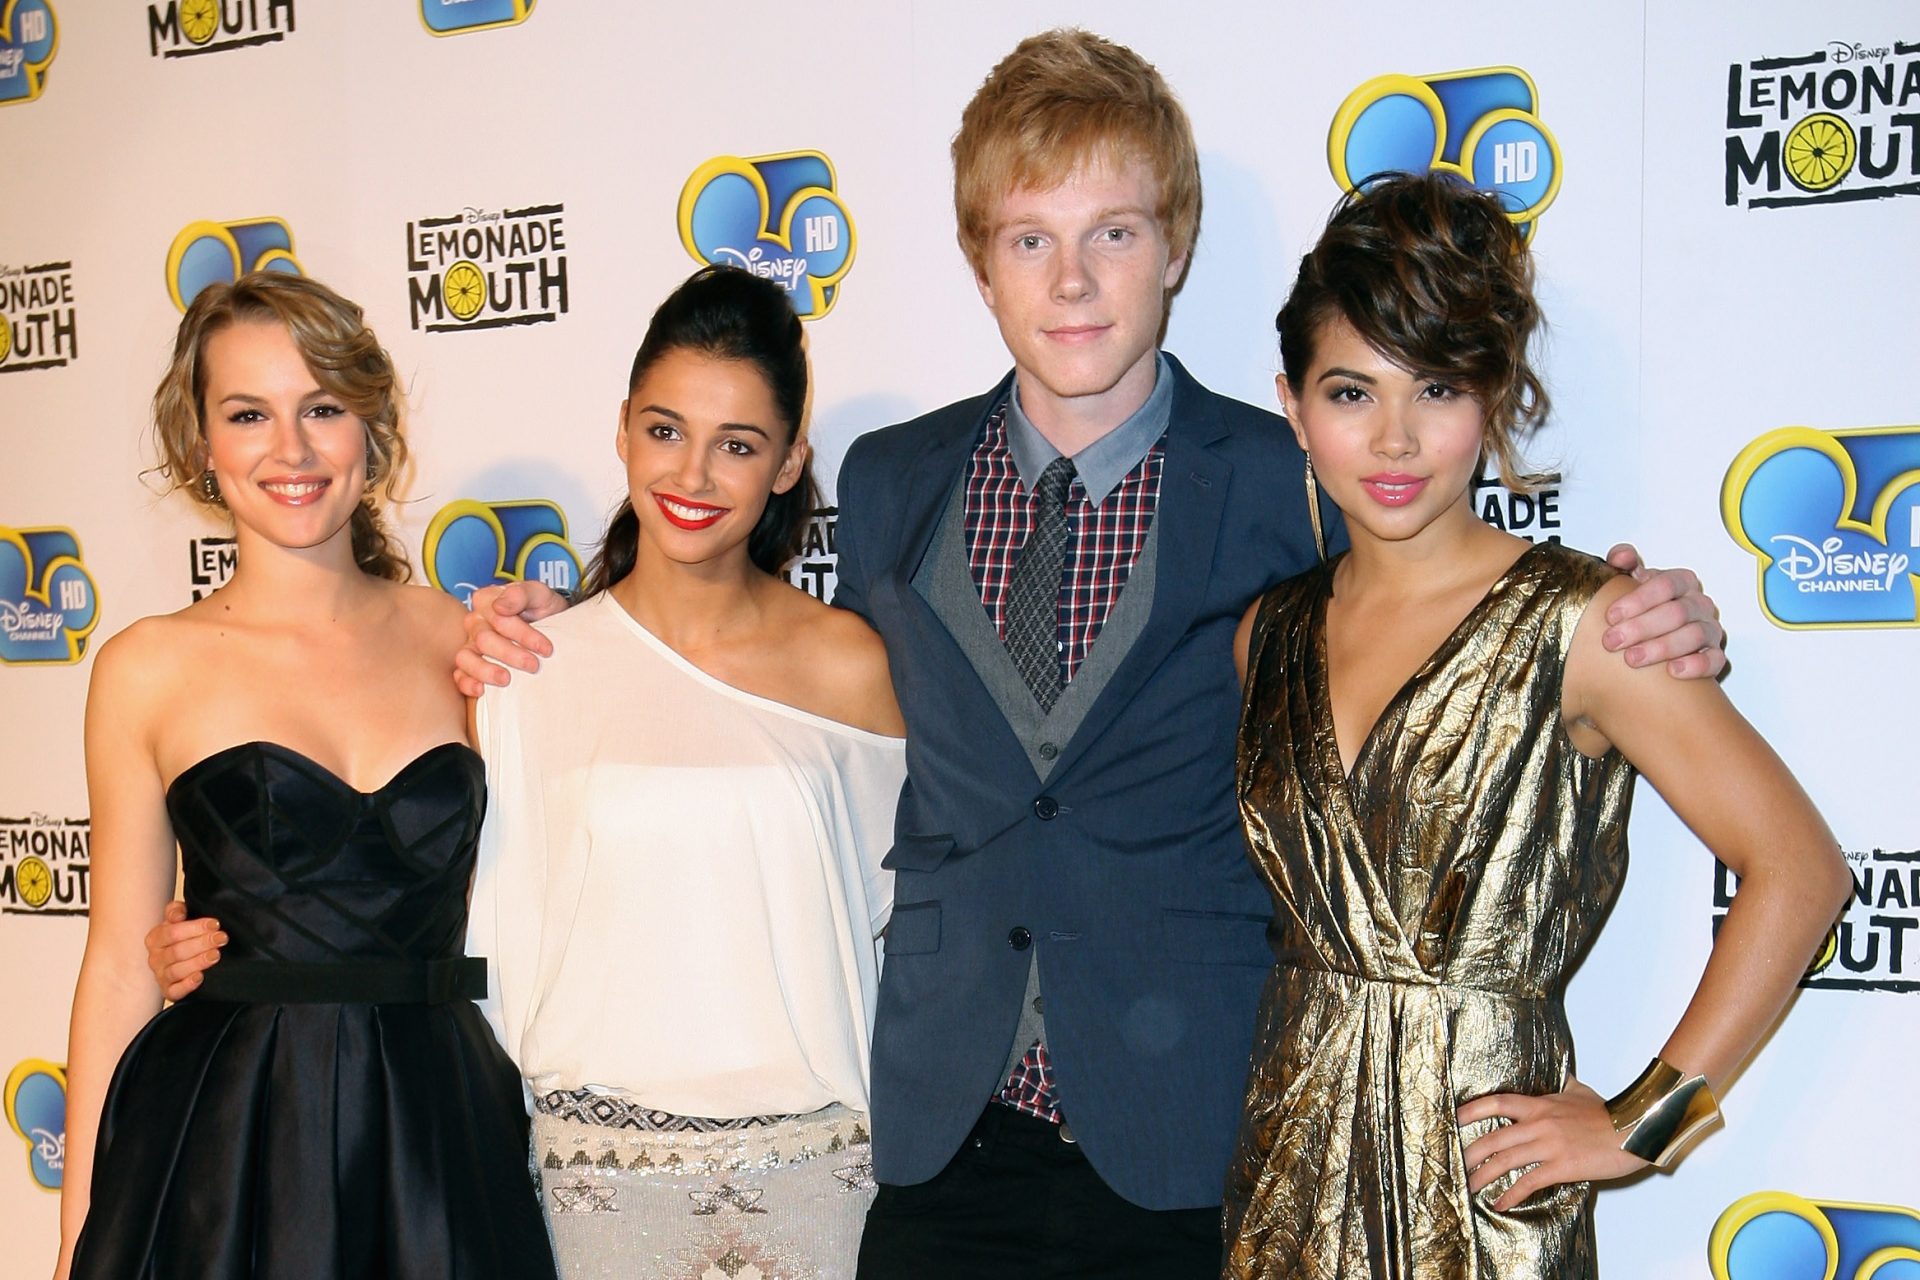 Adam Hicks on TV and in films